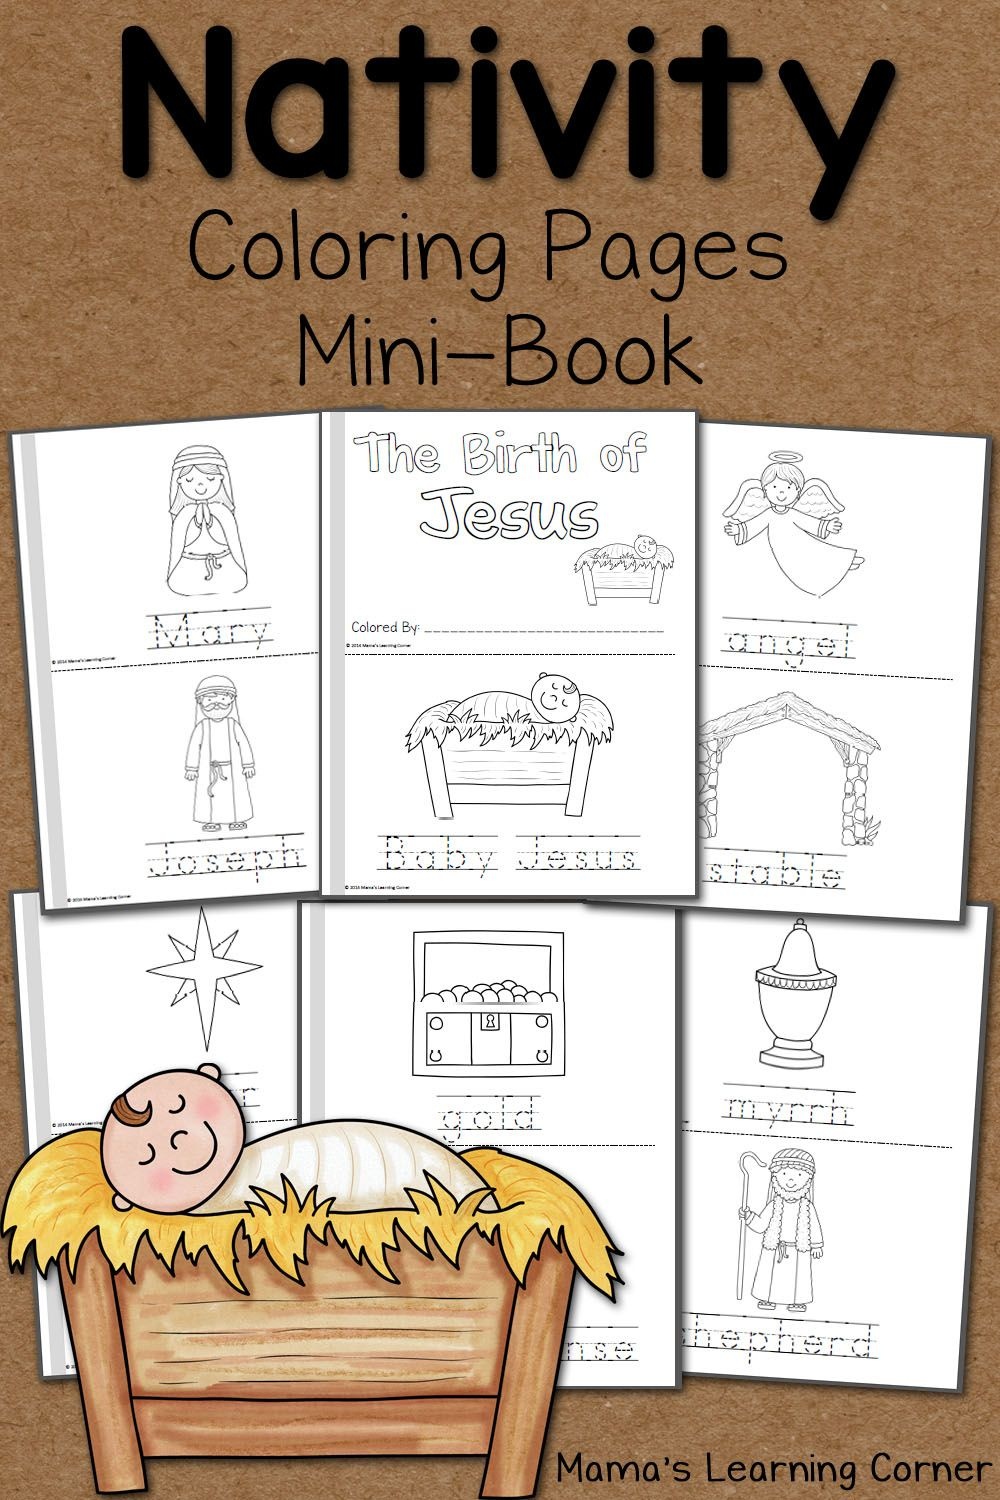 Nativity Coloring Pages | Printables | Nativity Coloring Pages - Free Printable Christmas Story Coloring Pages